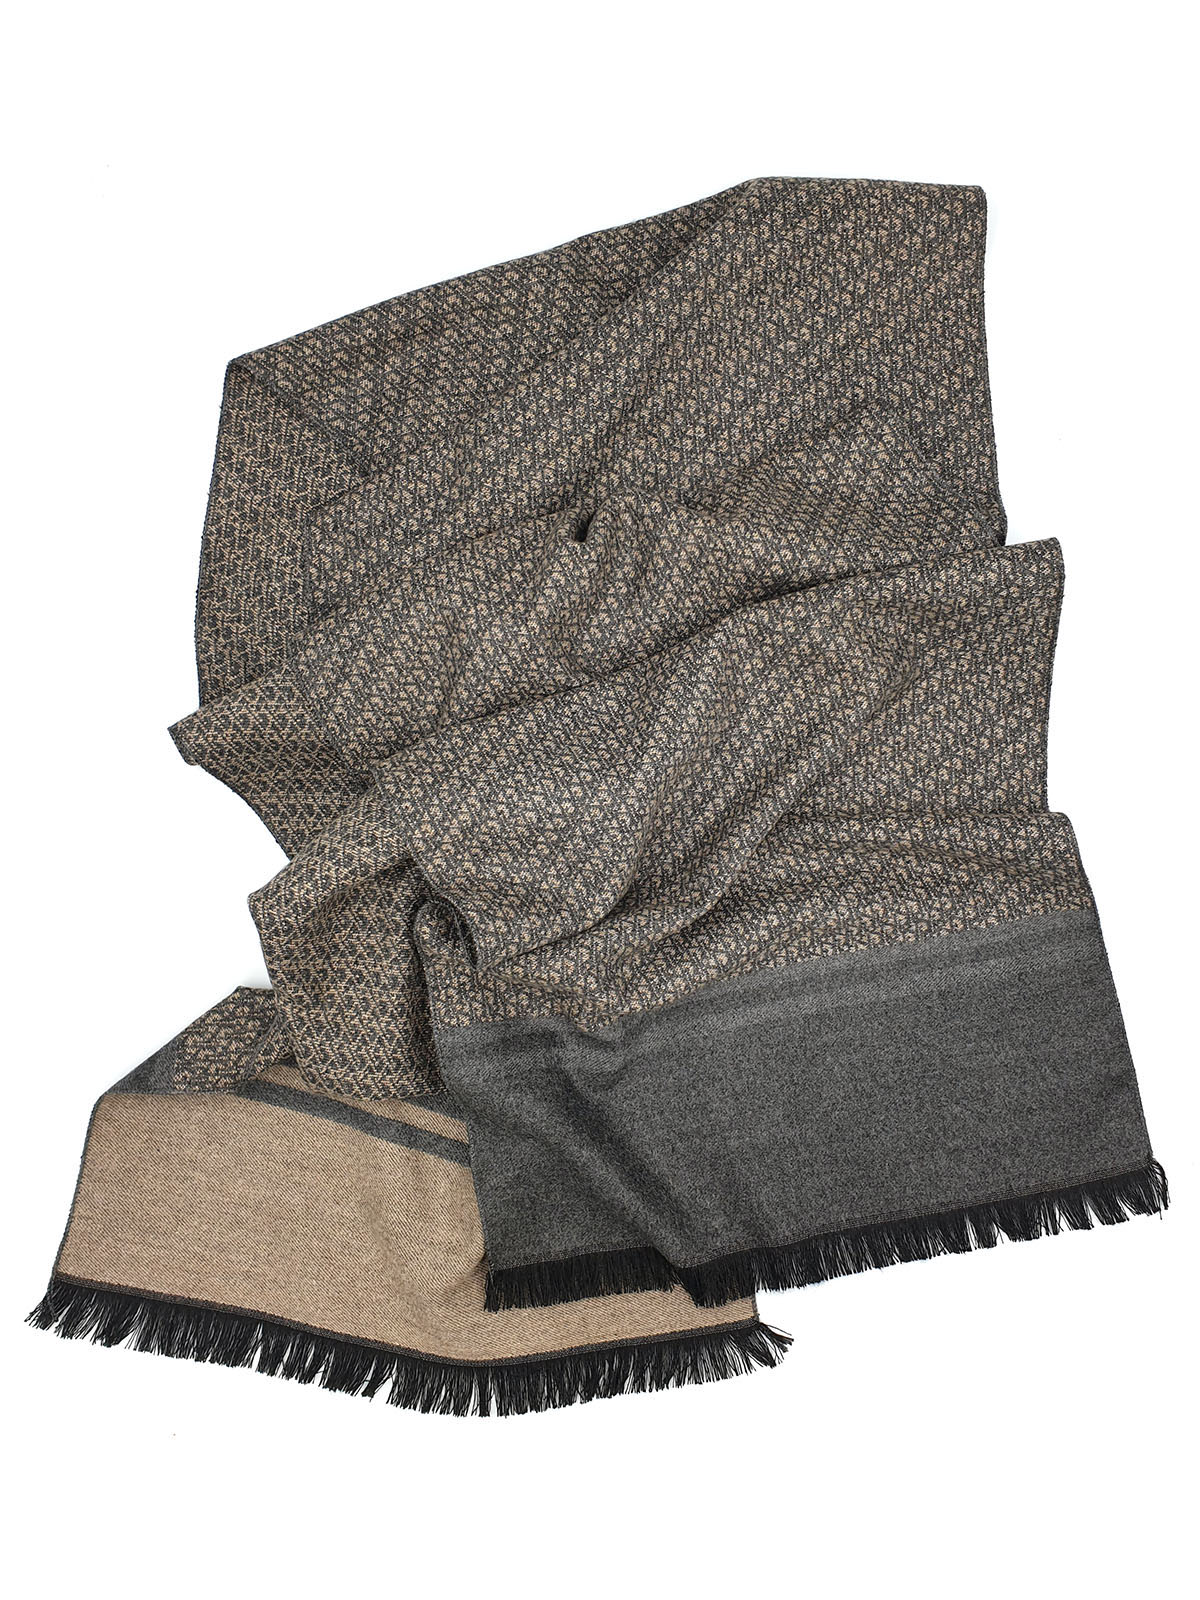 Gray and beige patterned scarf - 10324 - € 19.68 img2